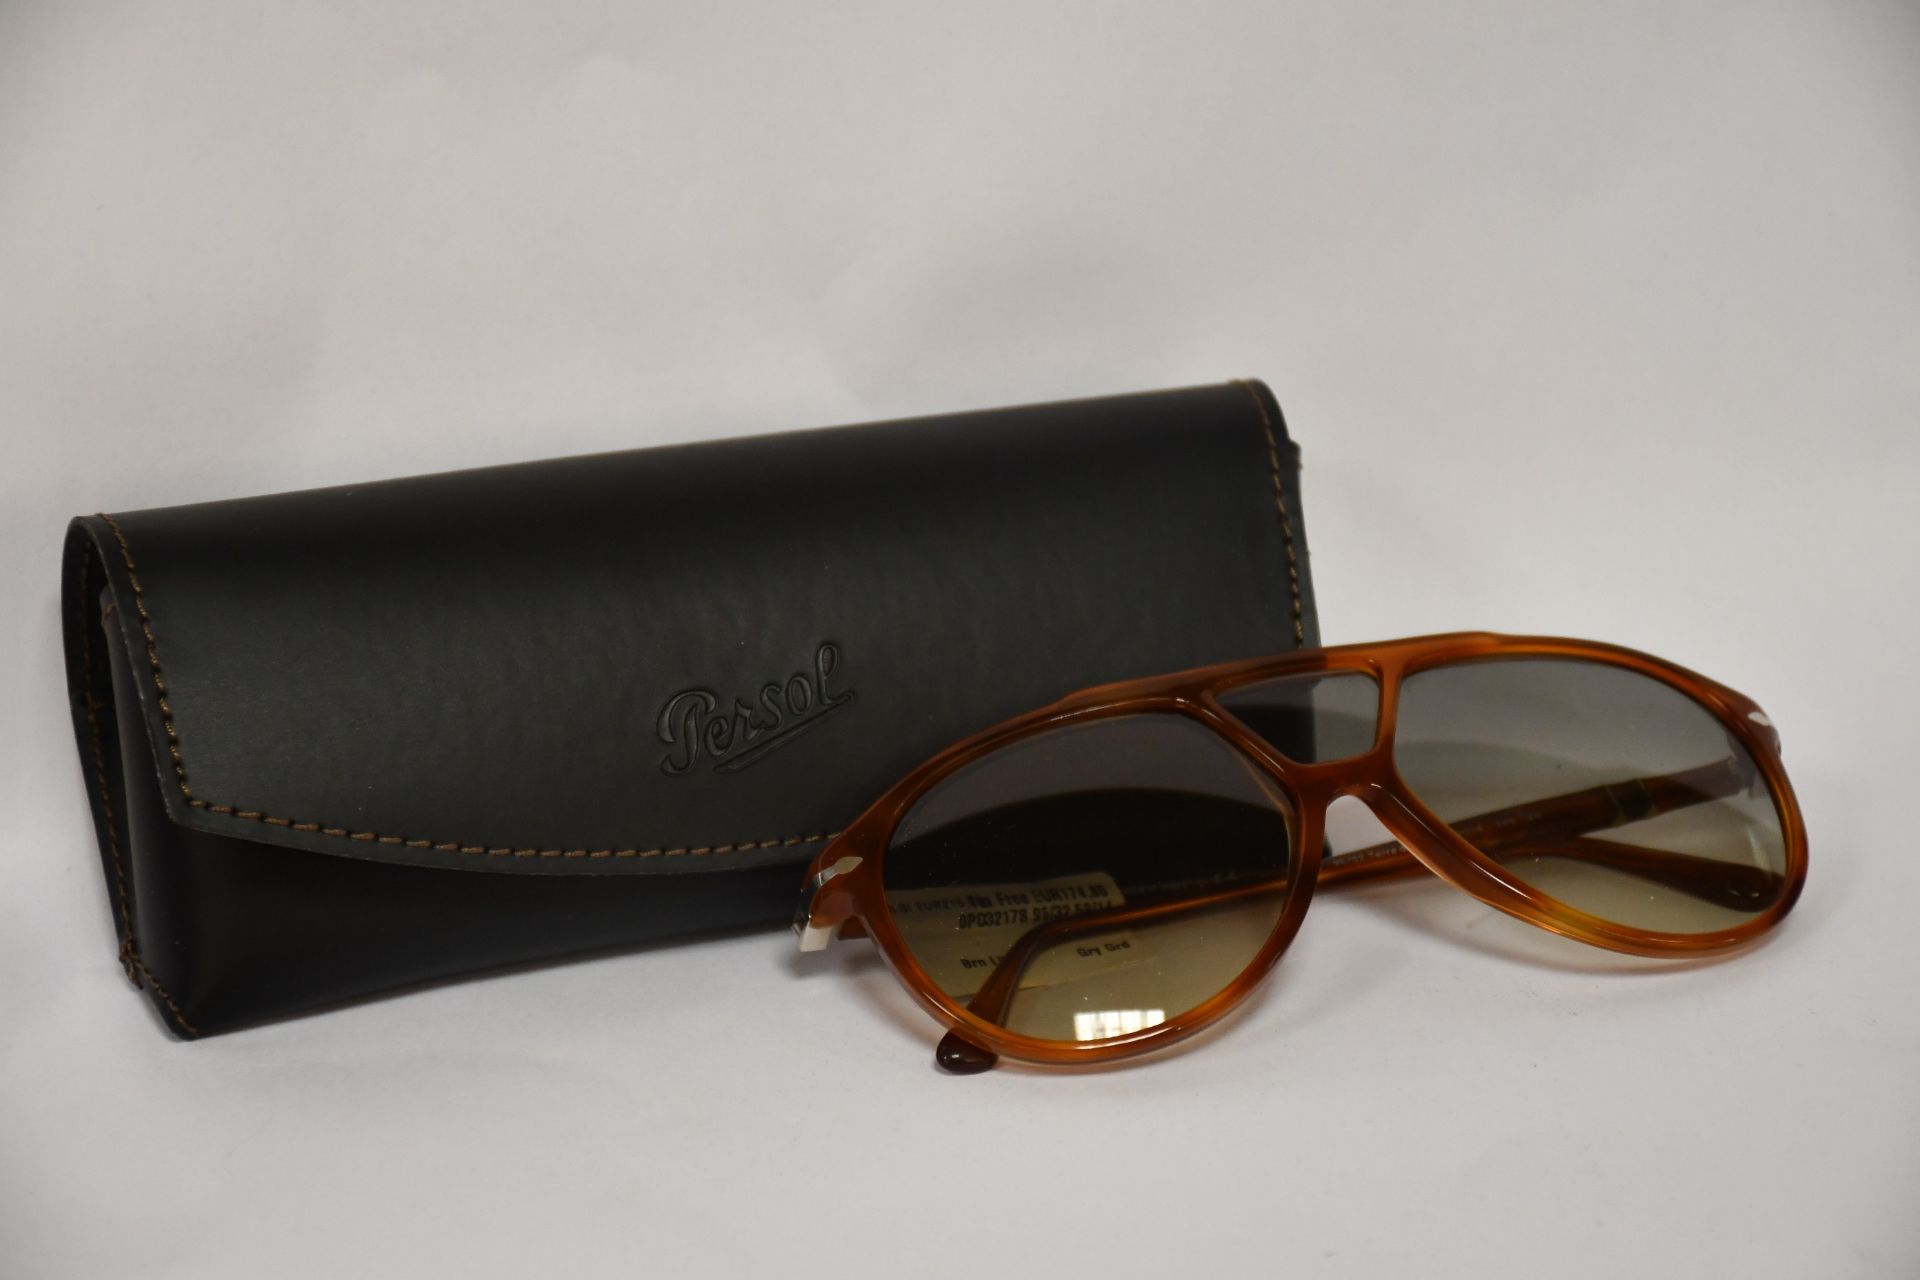 A pair of as new Persol sunglasses.